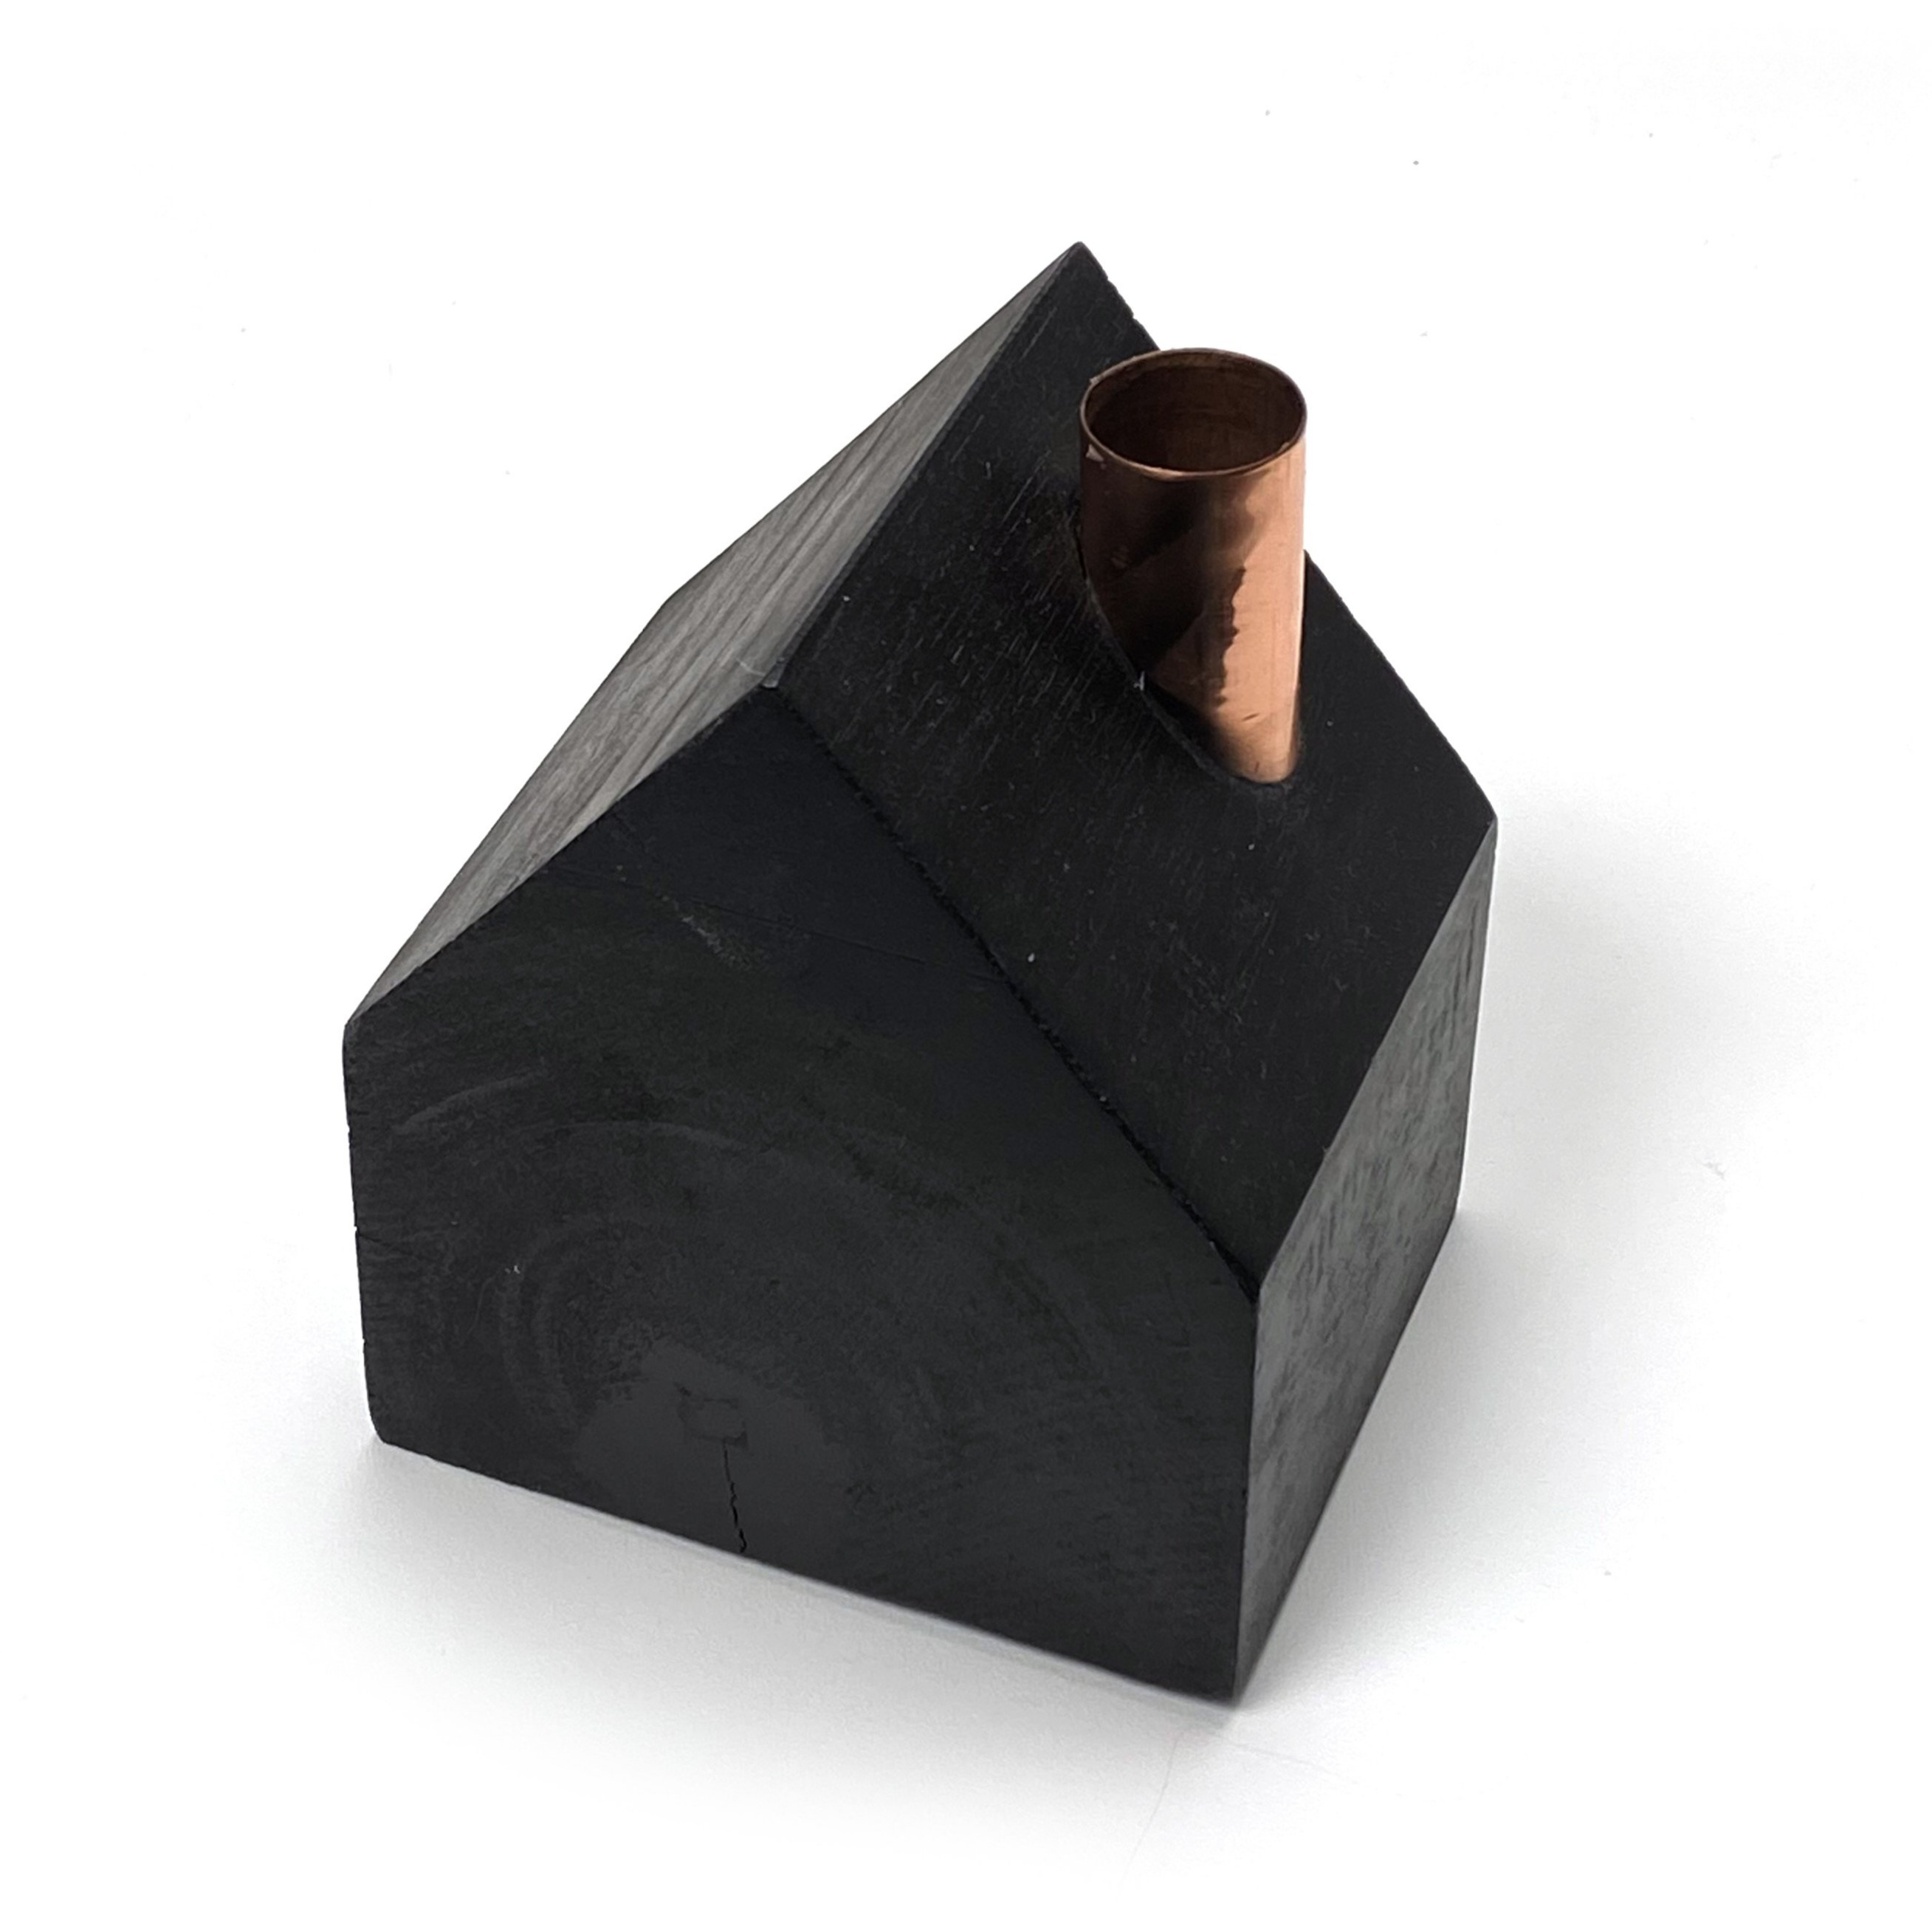 Muubs BLACK WOOD & COPPER HOUSE CANDLE HOLDER